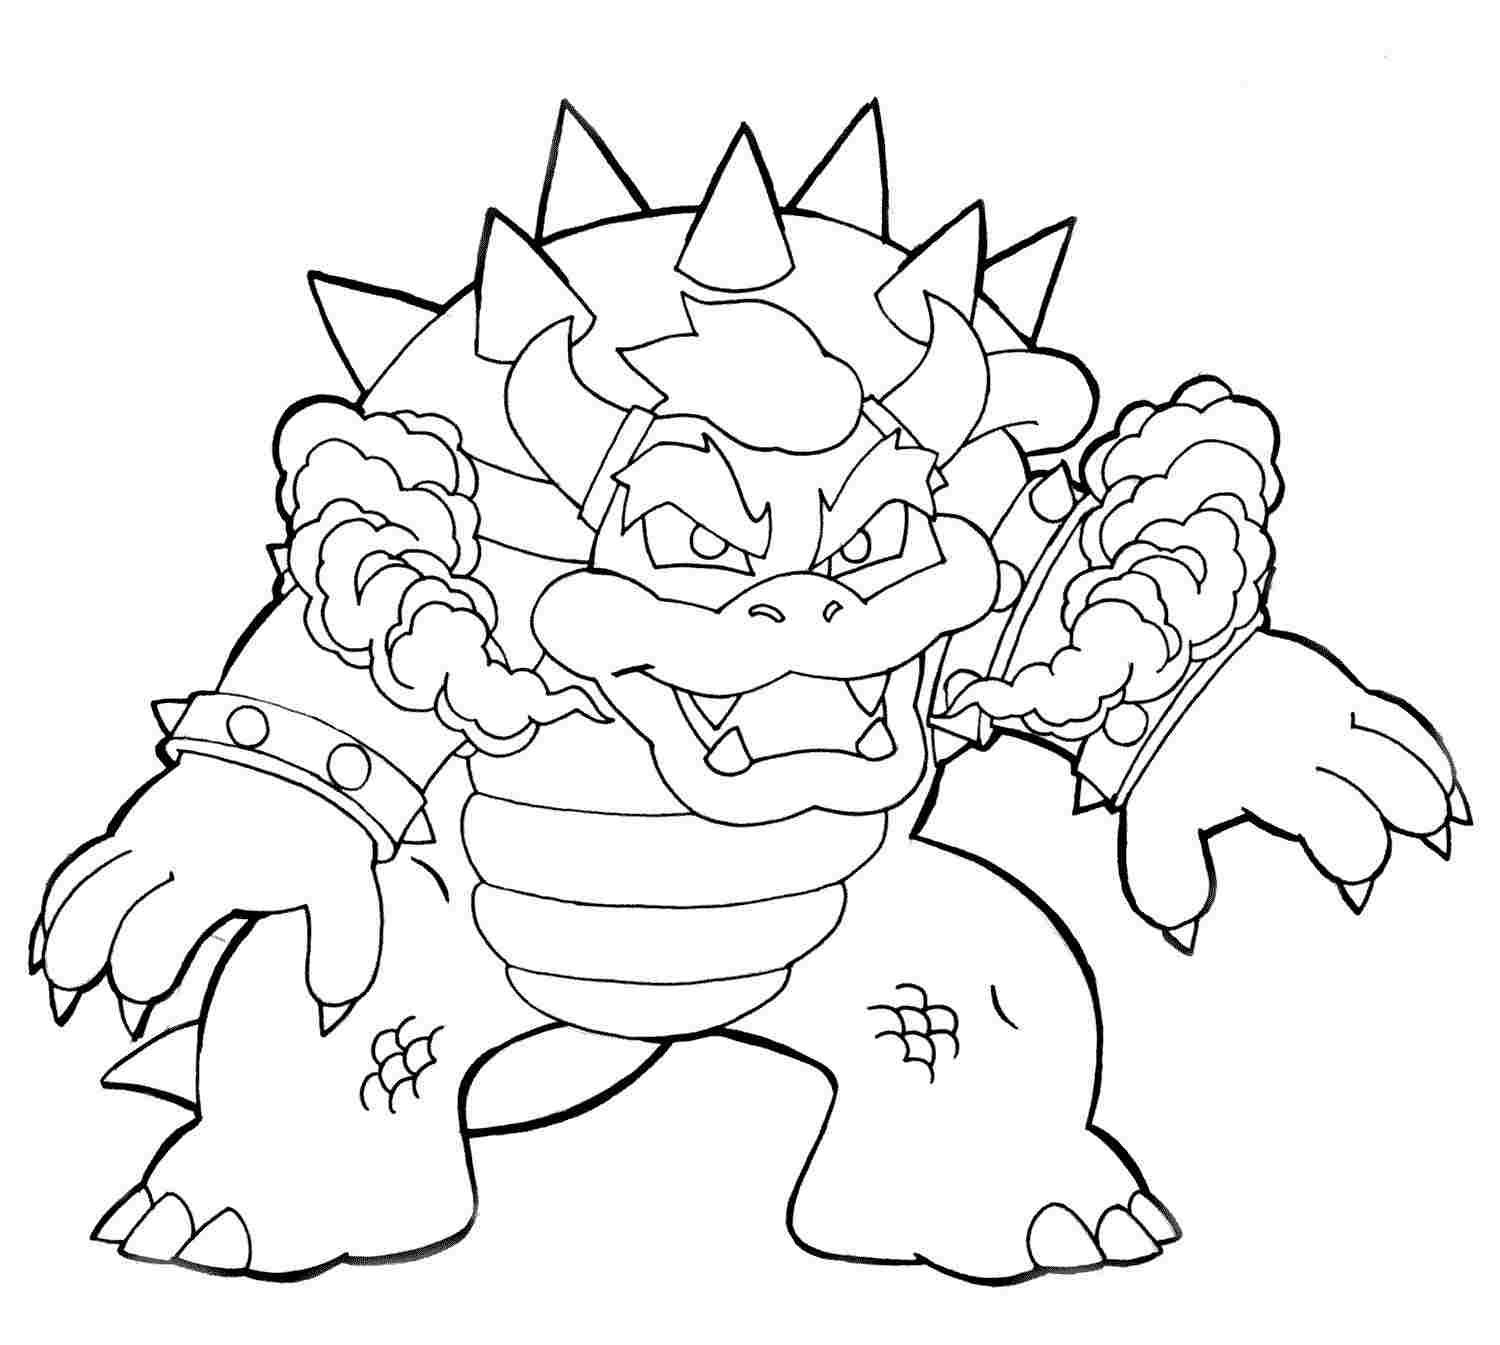 Dangerous Bowser from Super Mario Bros Coloring Pages